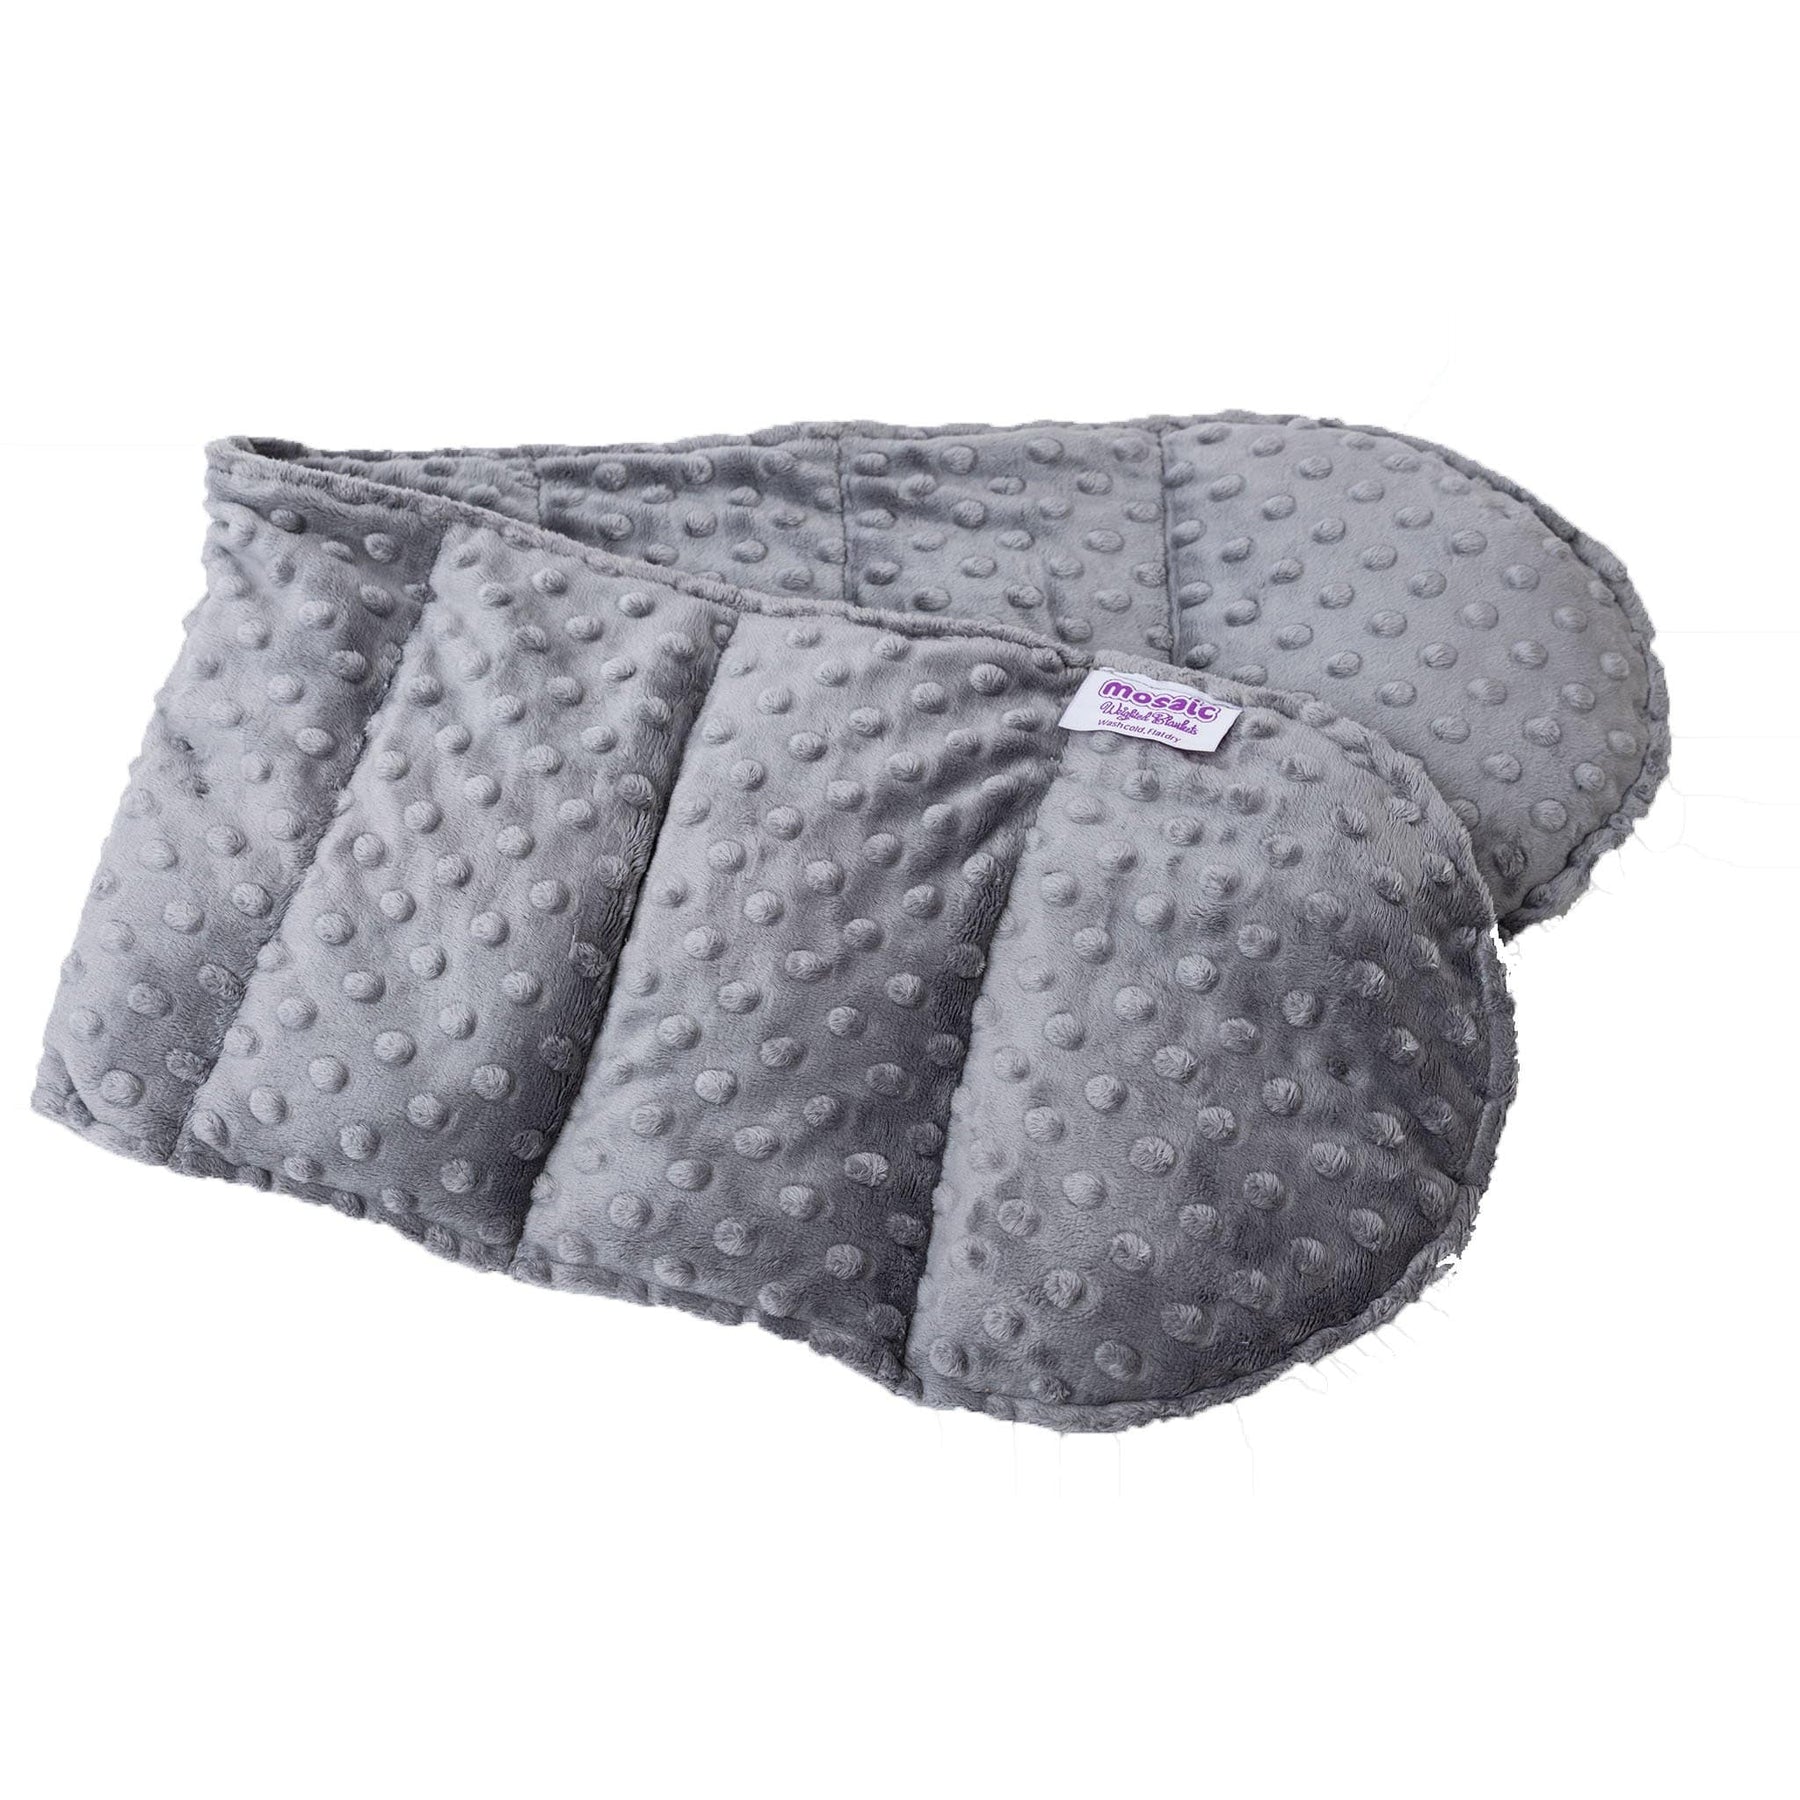 Our Original USA Handmade Weighted Blankets - Made in USA | Mosaic ...